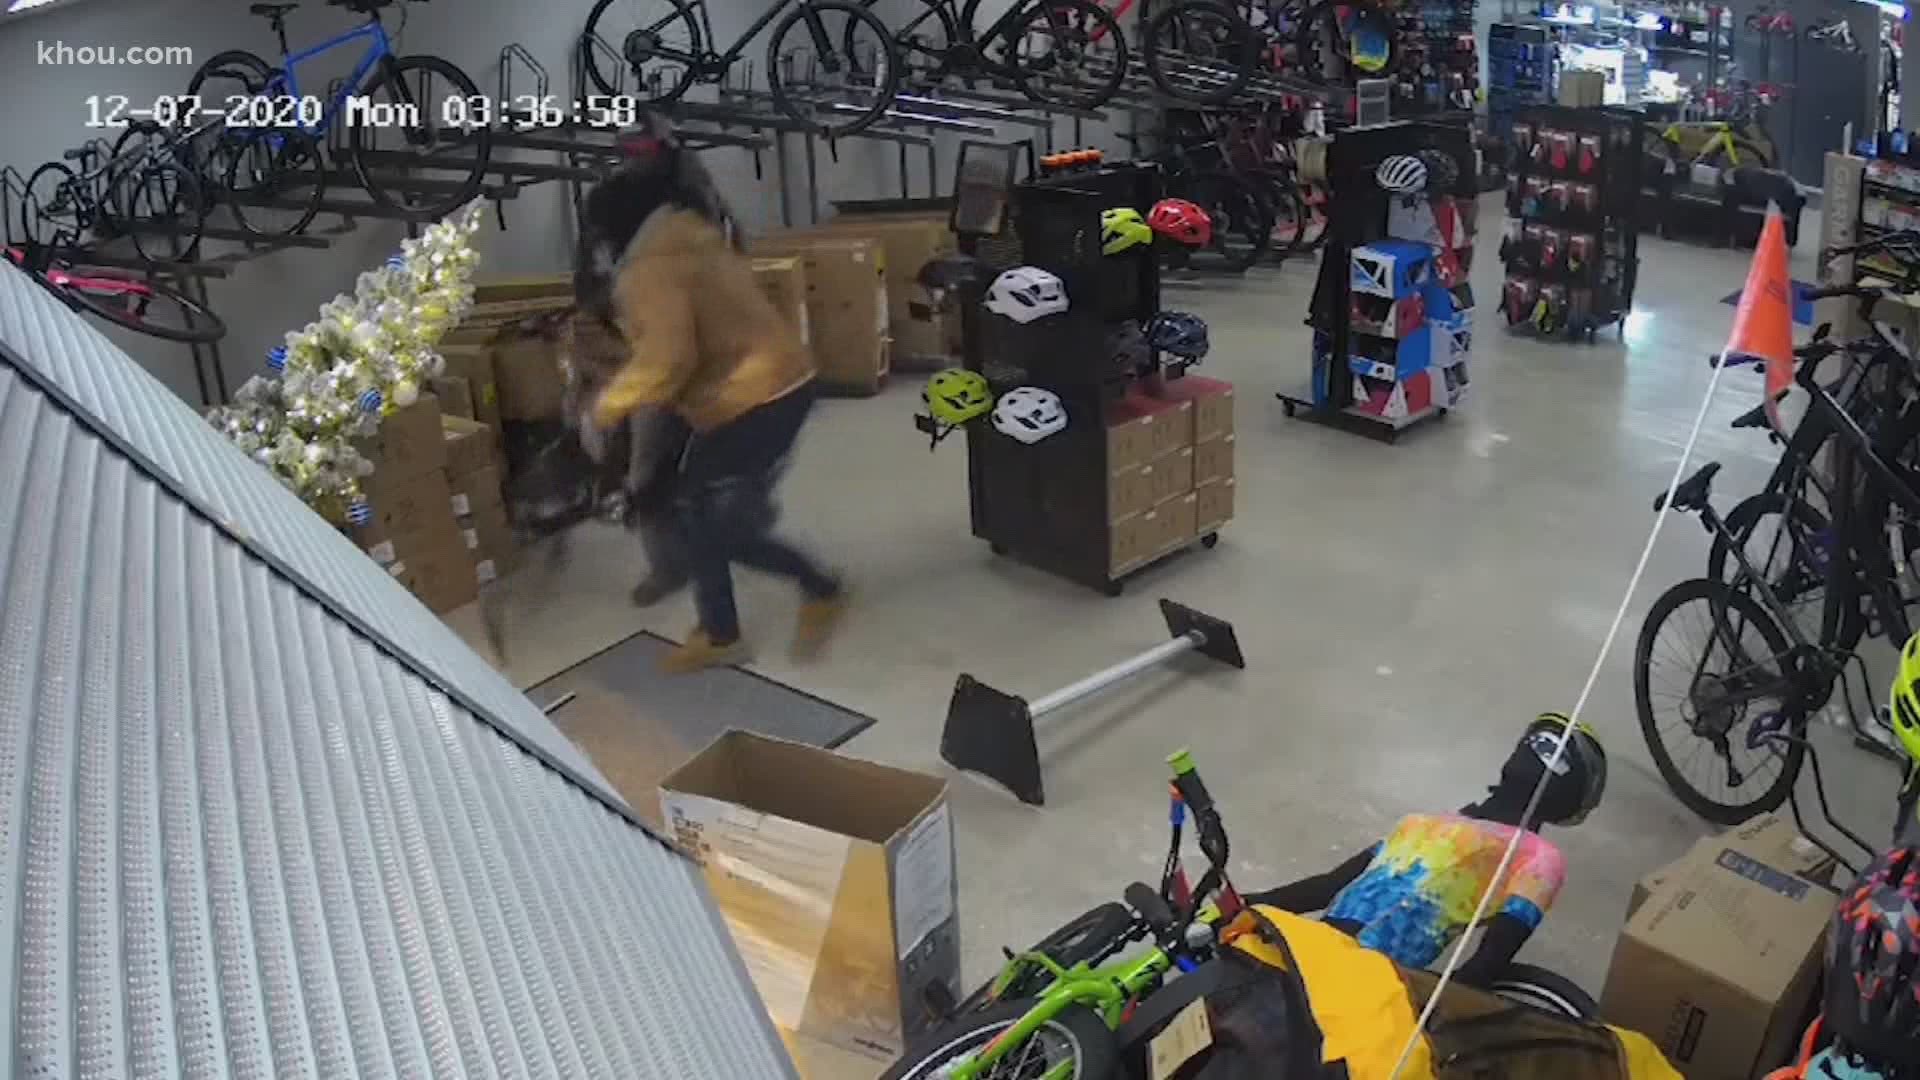 They slammed a U-Haul into the storefront before taking five bicycles worth about $10,000. Pearland Bicycles says it's the second time they've been hit in 2020.